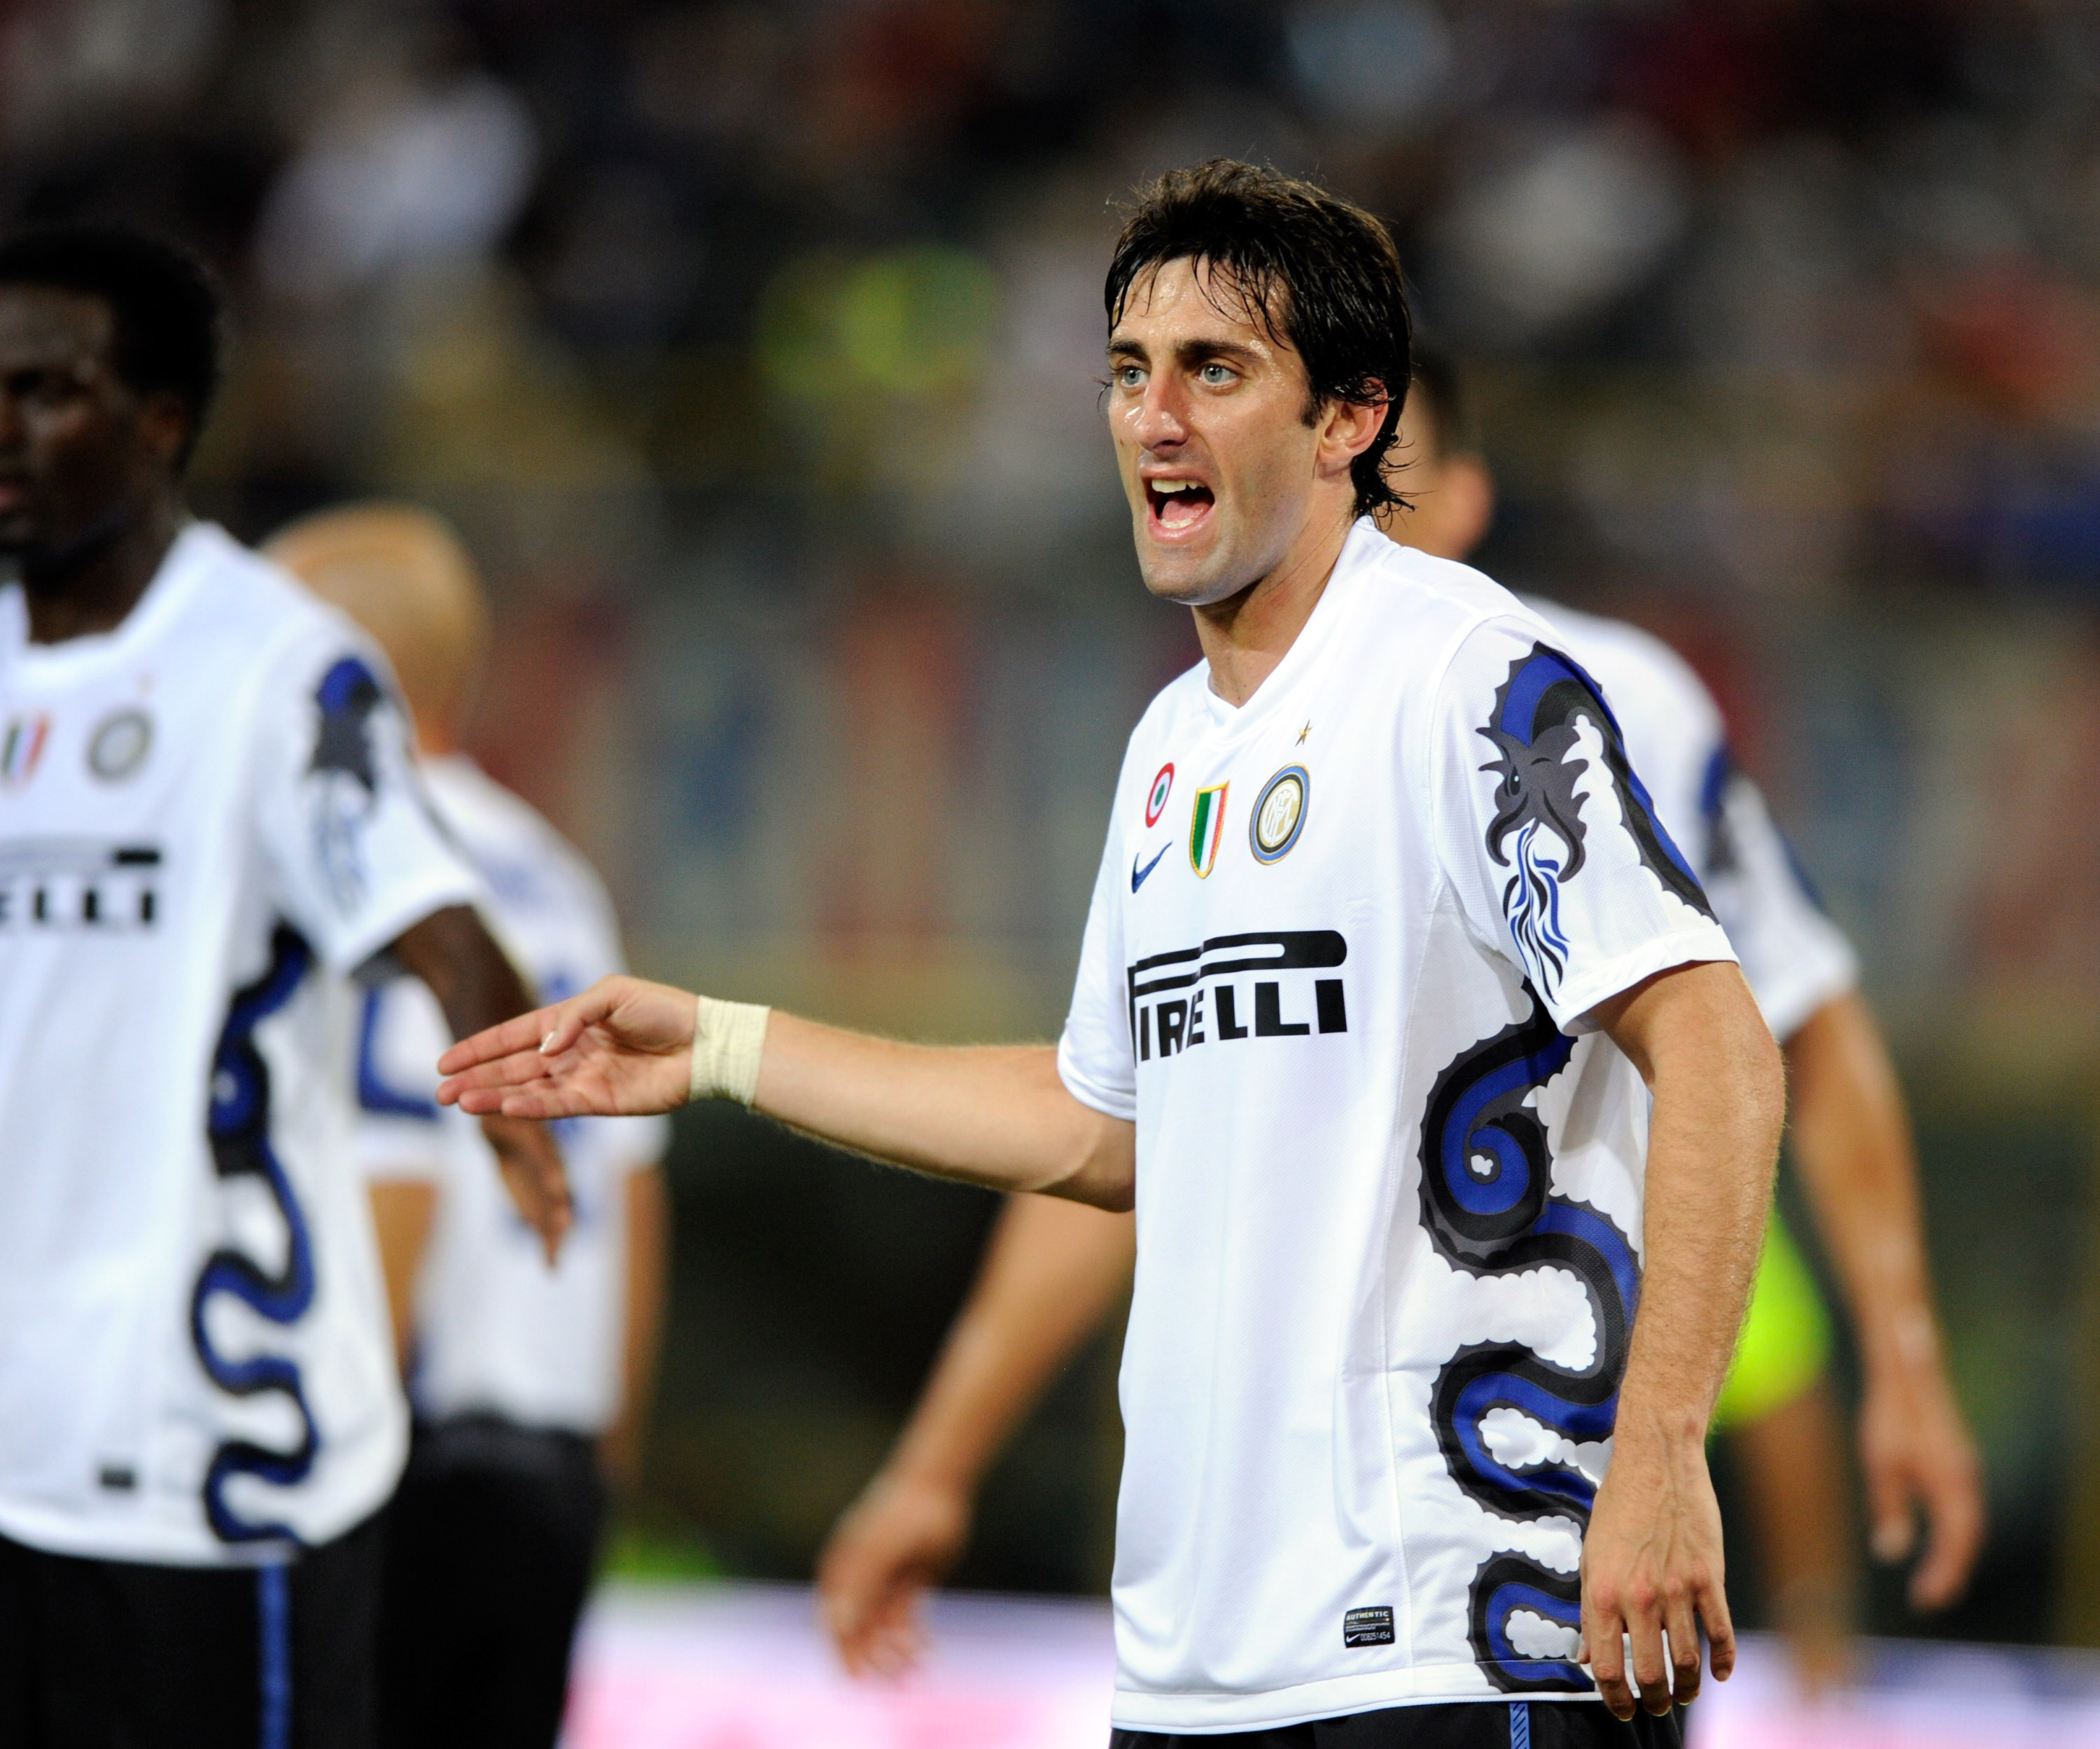 BOLOGNA, ITALY - AUGUST 30:  Diego Milito of FC Internazionale looks on during the Serie A match between Bologna and Inter at Stadio Renato Dall'Ara on August 30, 2010 in Bologna, Italy.  (Photo by Claudio Villa/Getty Images)